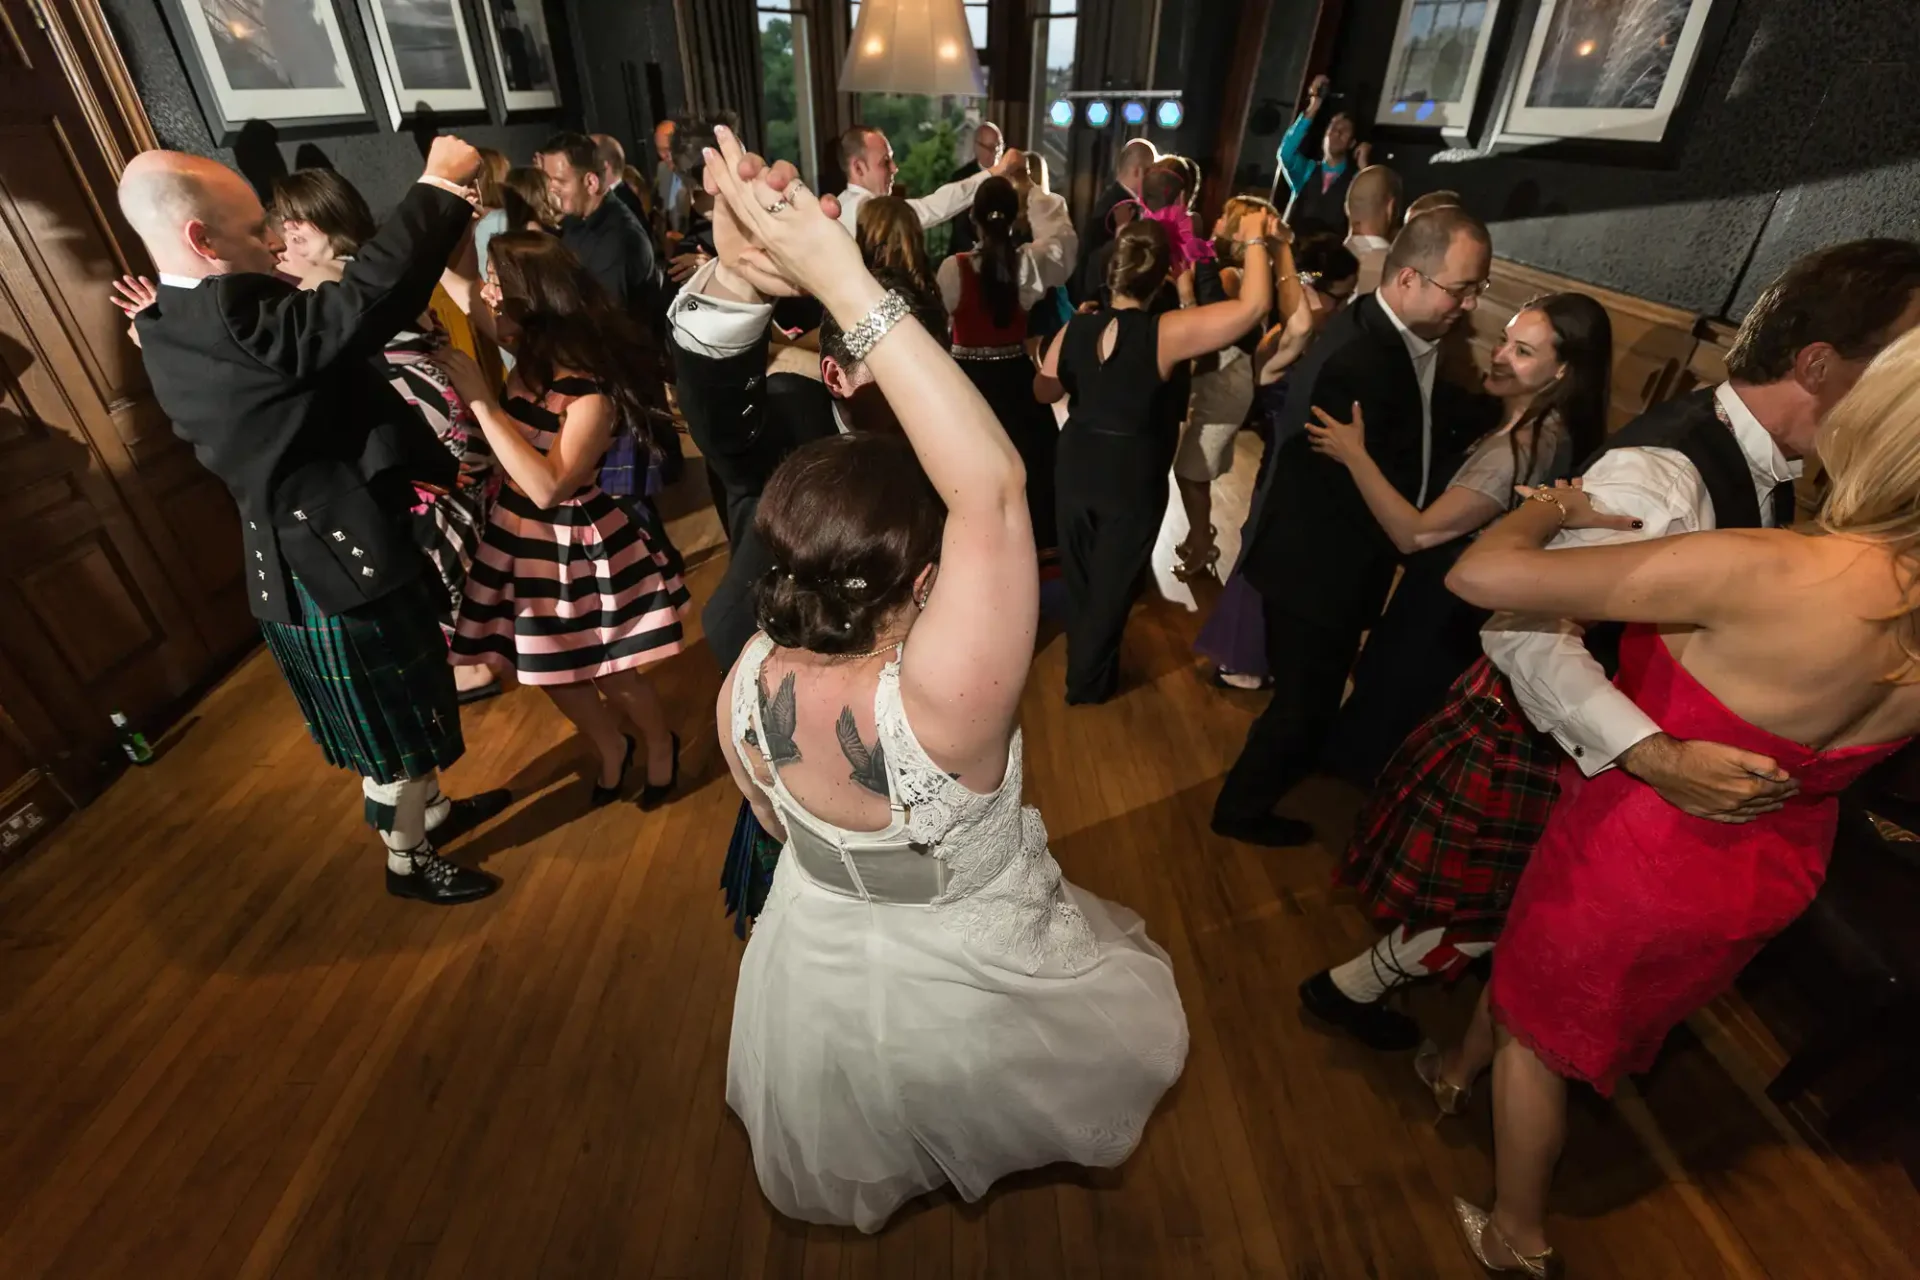 A bride in a white dress dancing with guests in a lively ballroom, some wearing kilts, under warm lighting.